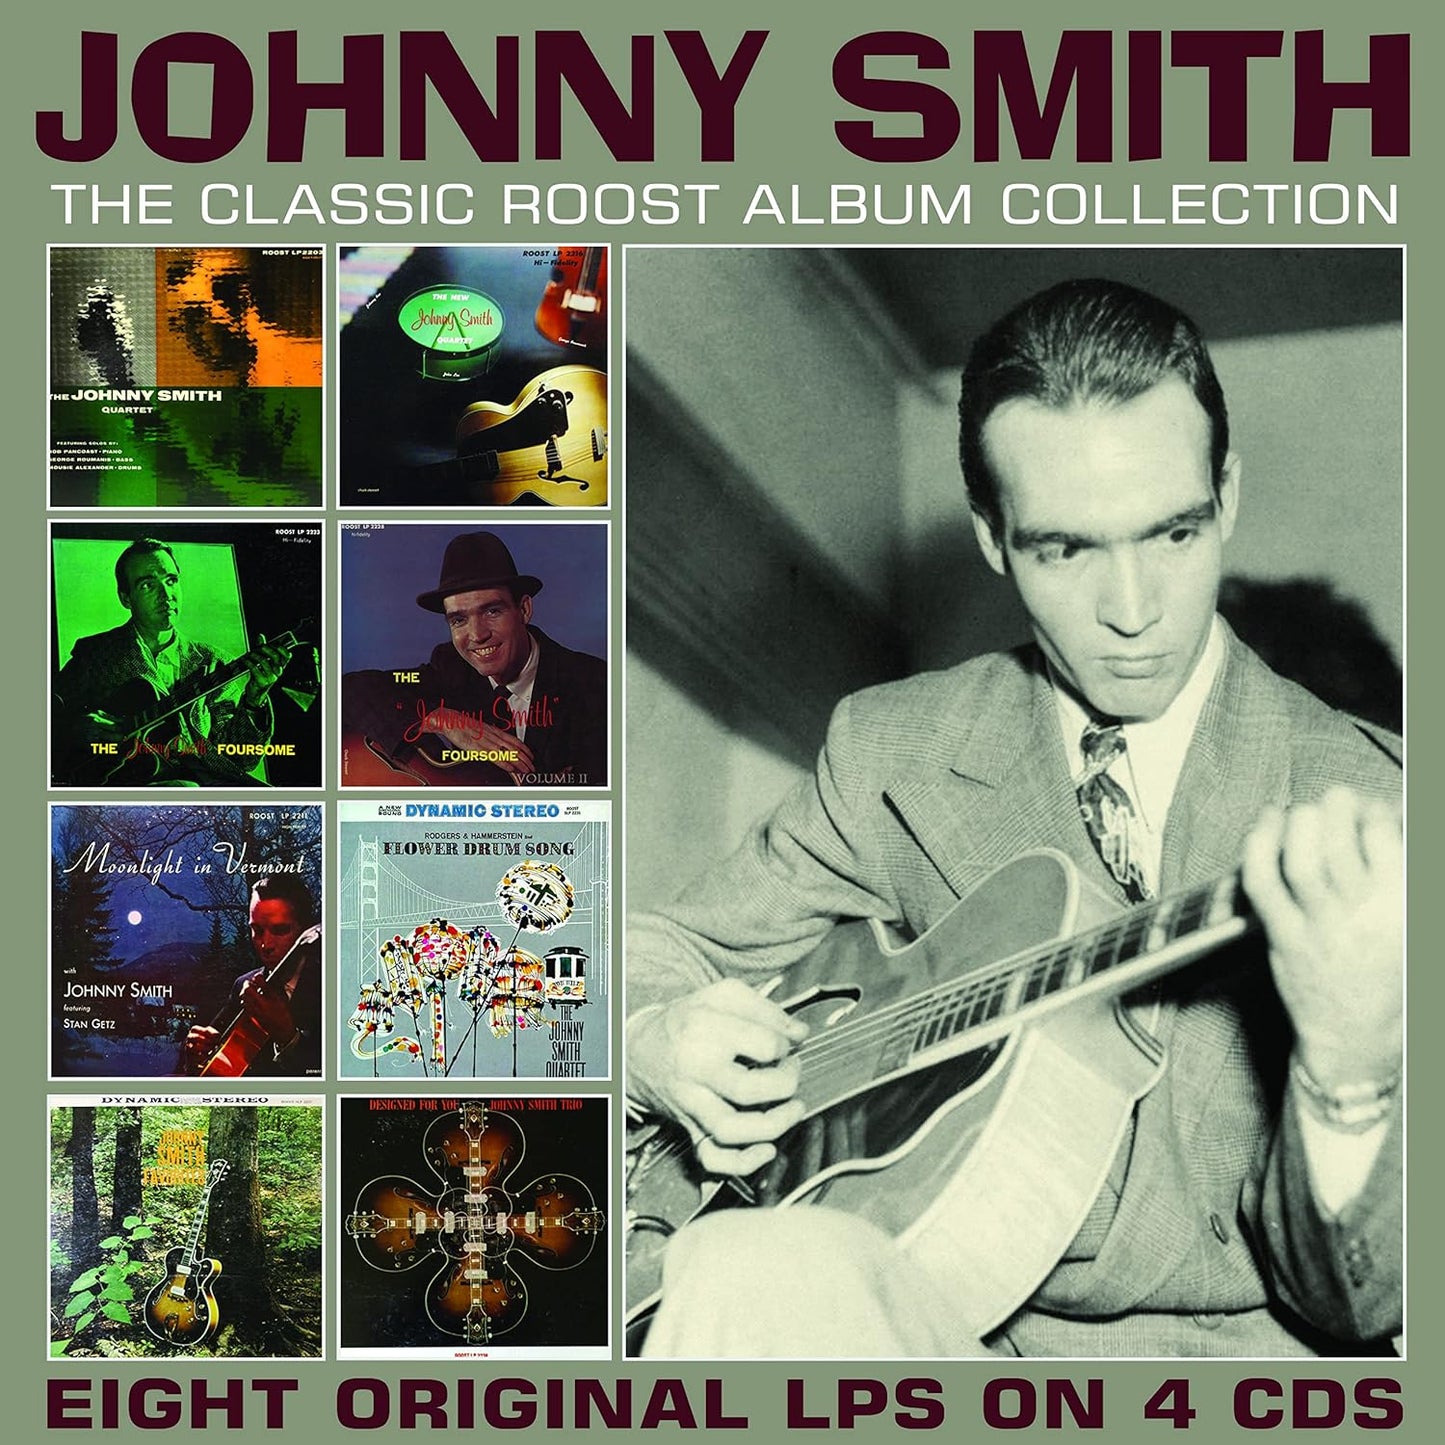 JOHNNY SMITH: The Classic Roost Album Collection (4 CDS)